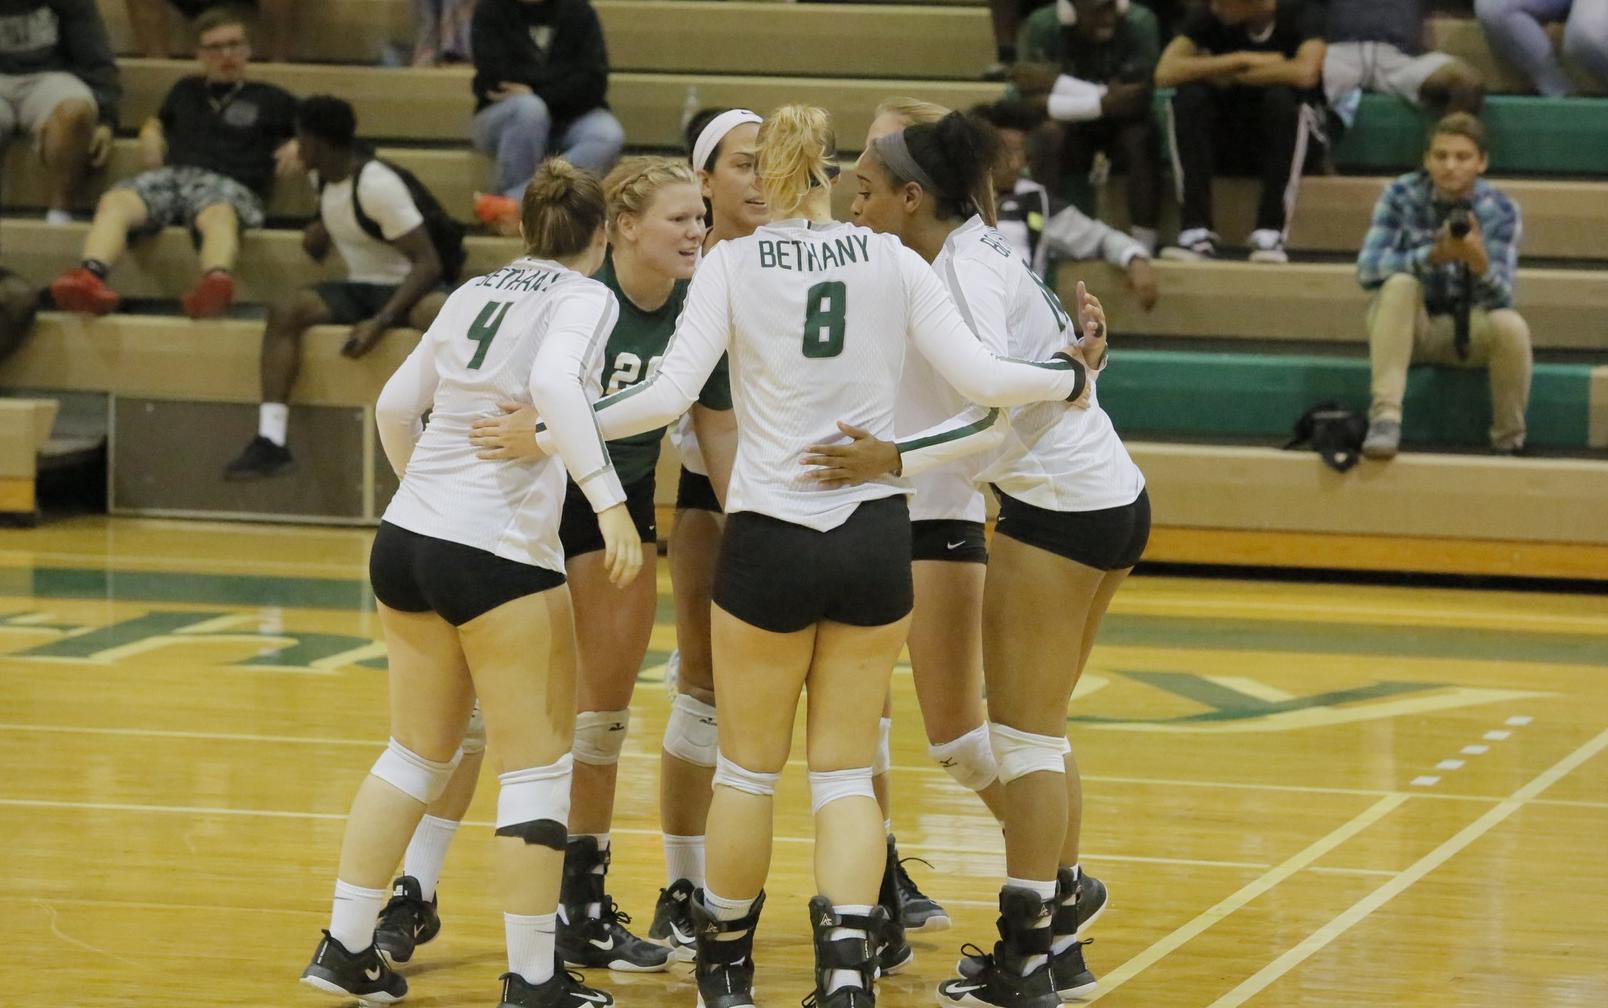 Bethany defeated at Westminster, 3-0